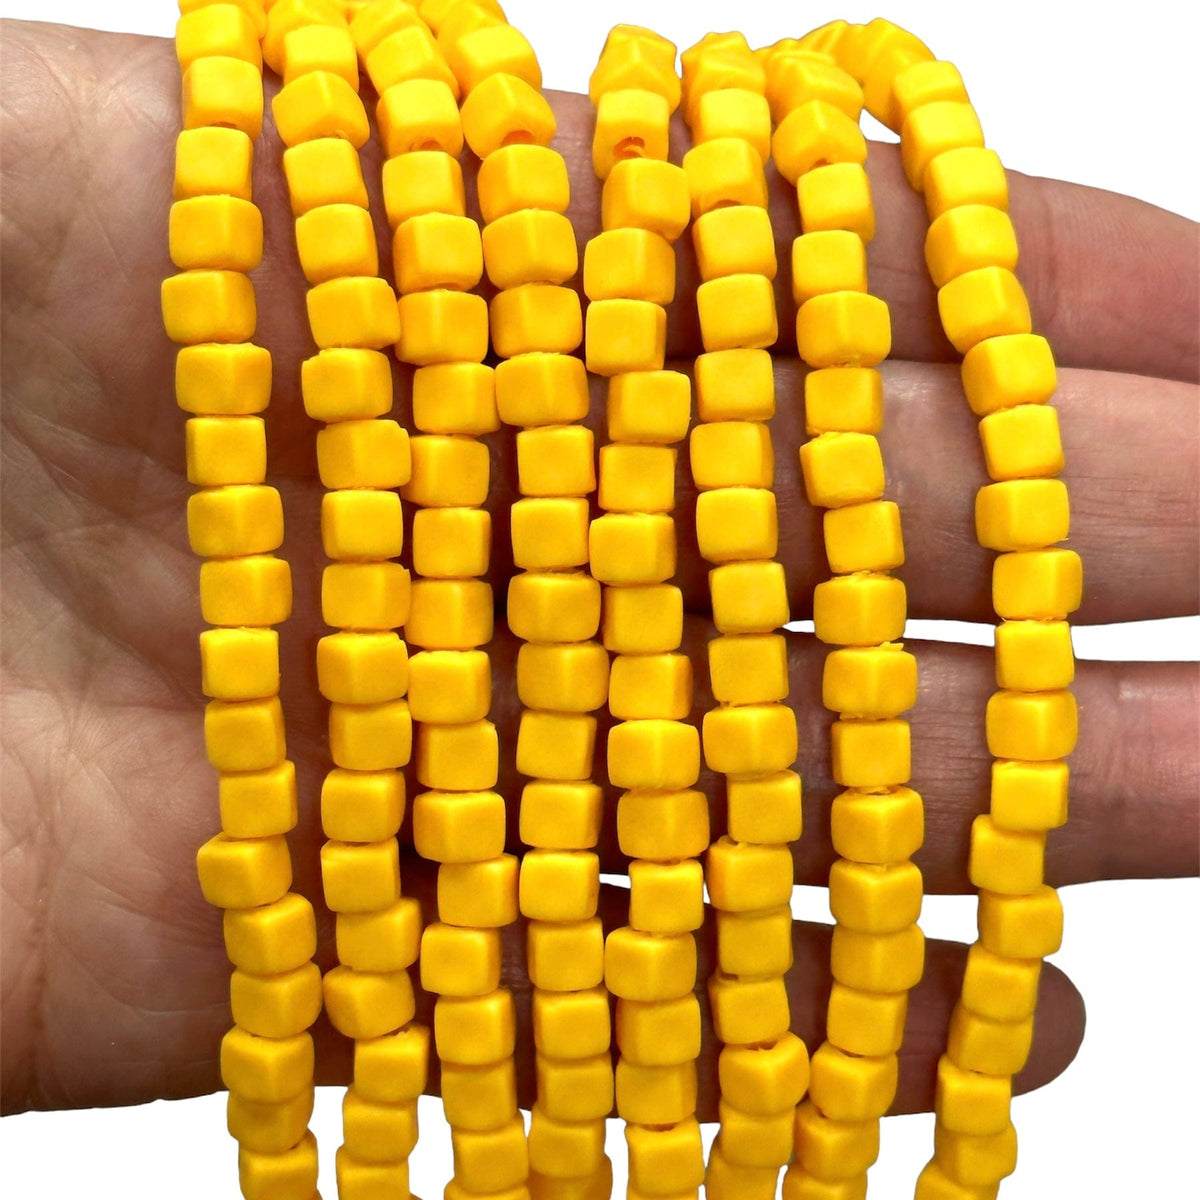 4000 Pcs Yellow Clay Beads for Bracelets Making, Polymer Spacer